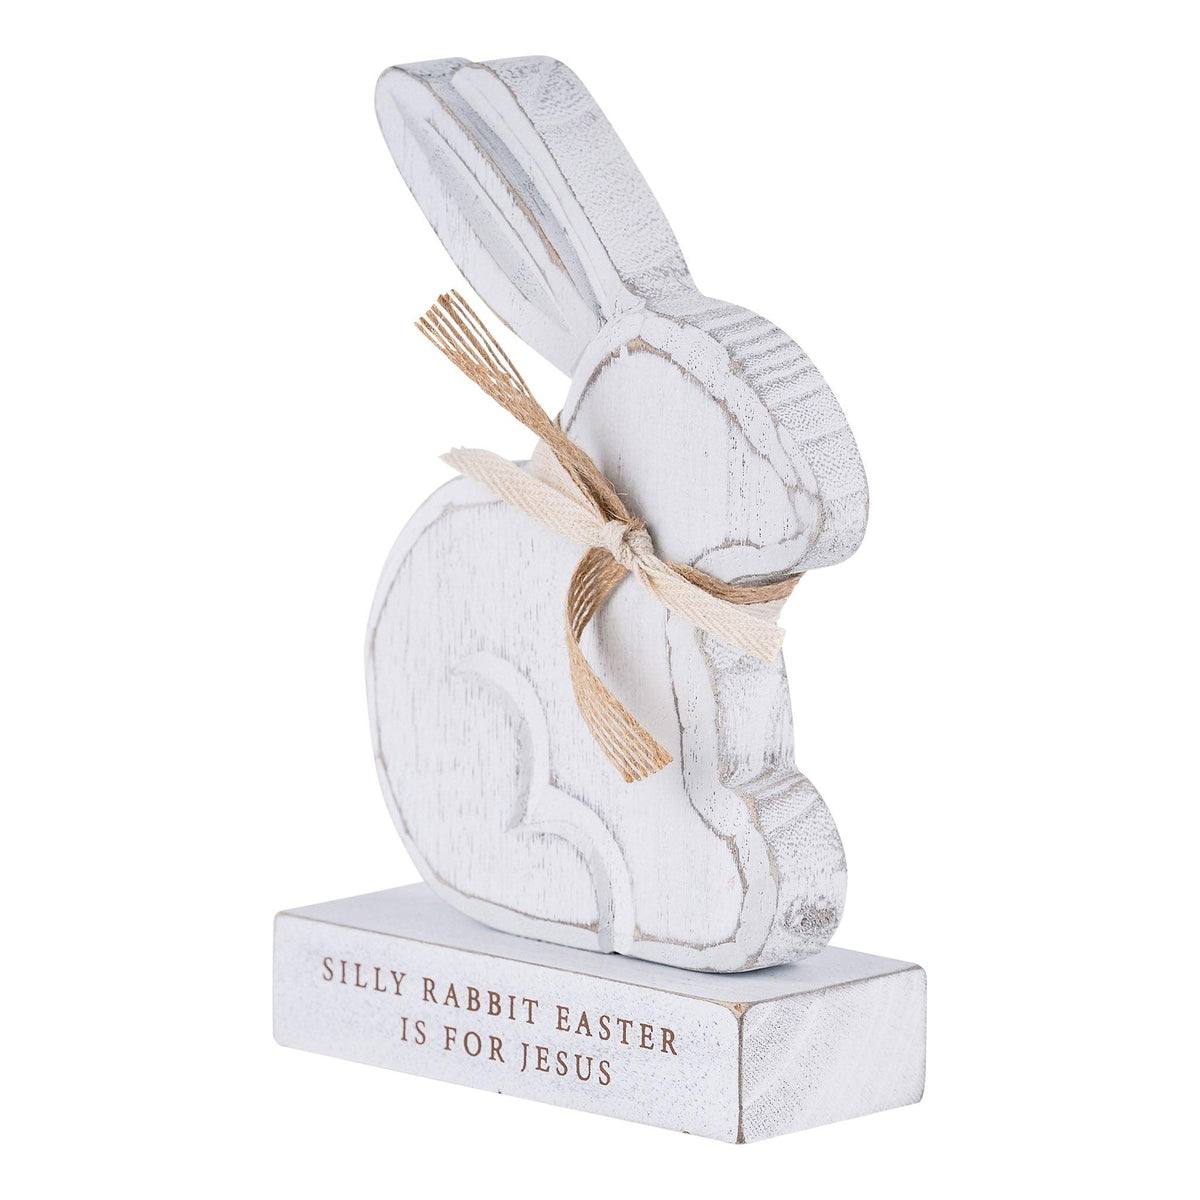 Silly Rabbit Easter is for Jesus Wooden Bunny - GLORY HAUS 